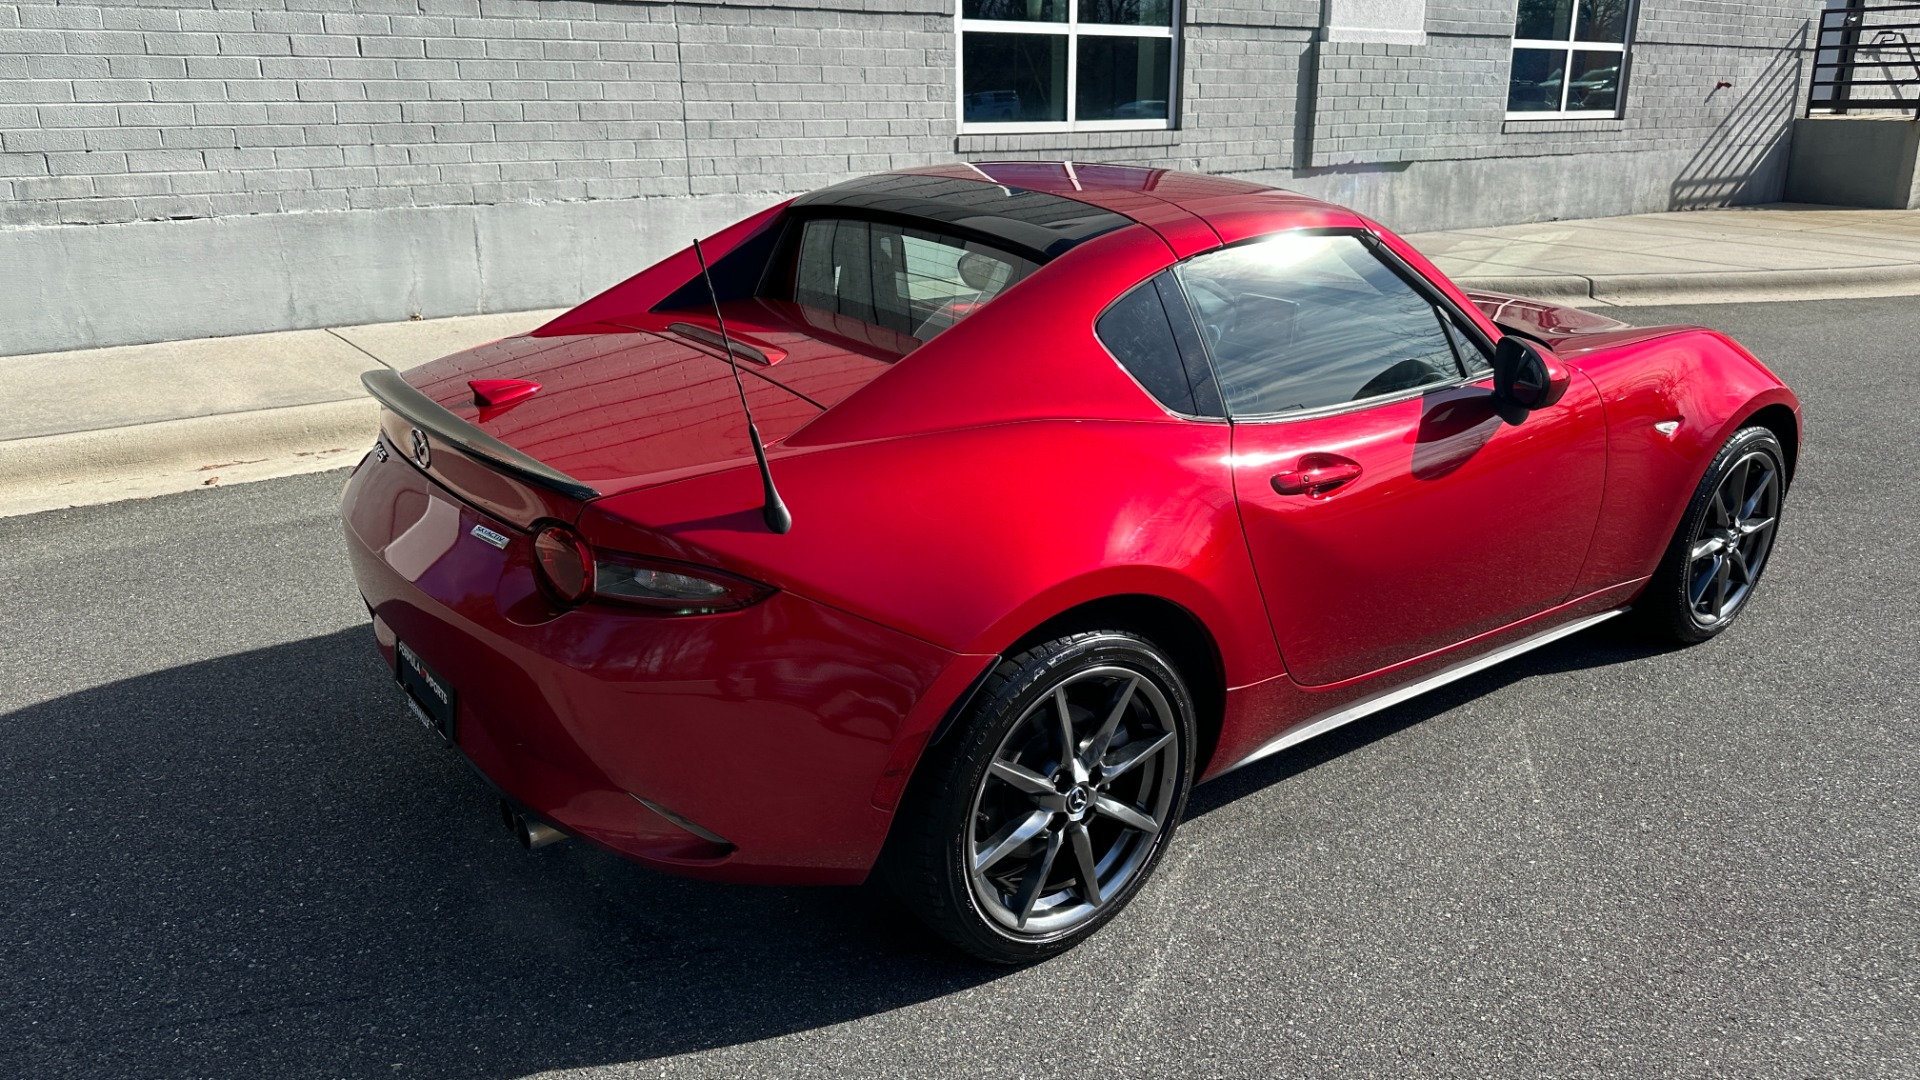 Used 2017 Mazda MX-5 Miata RF GRAND TOURING / POWER HARD TOP CONVERTIBLE / AUTOMATIC for sale $22,995 at Formula Imports in Charlotte NC 28227 4